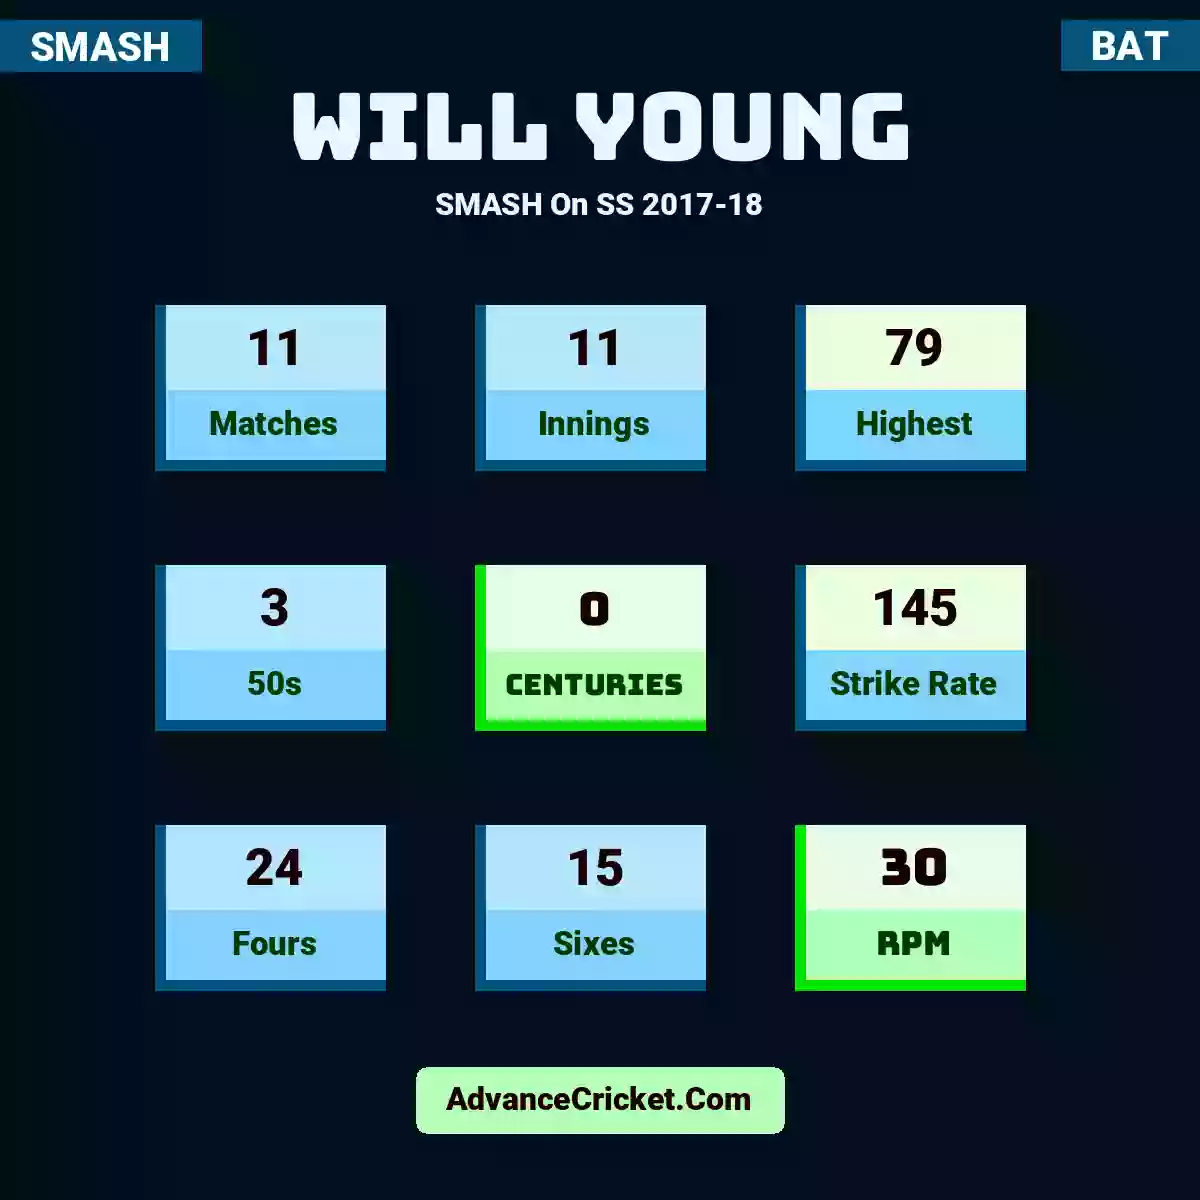 Will Young SMASH  On SS 2017-18, Will Young played 11 matches, scored 79 runs as highest, 3 half-centuries, and 0 centuries, with a strike rate of 145. W.Young hit 24 fours and 15 sixes, with an RPM of 30.